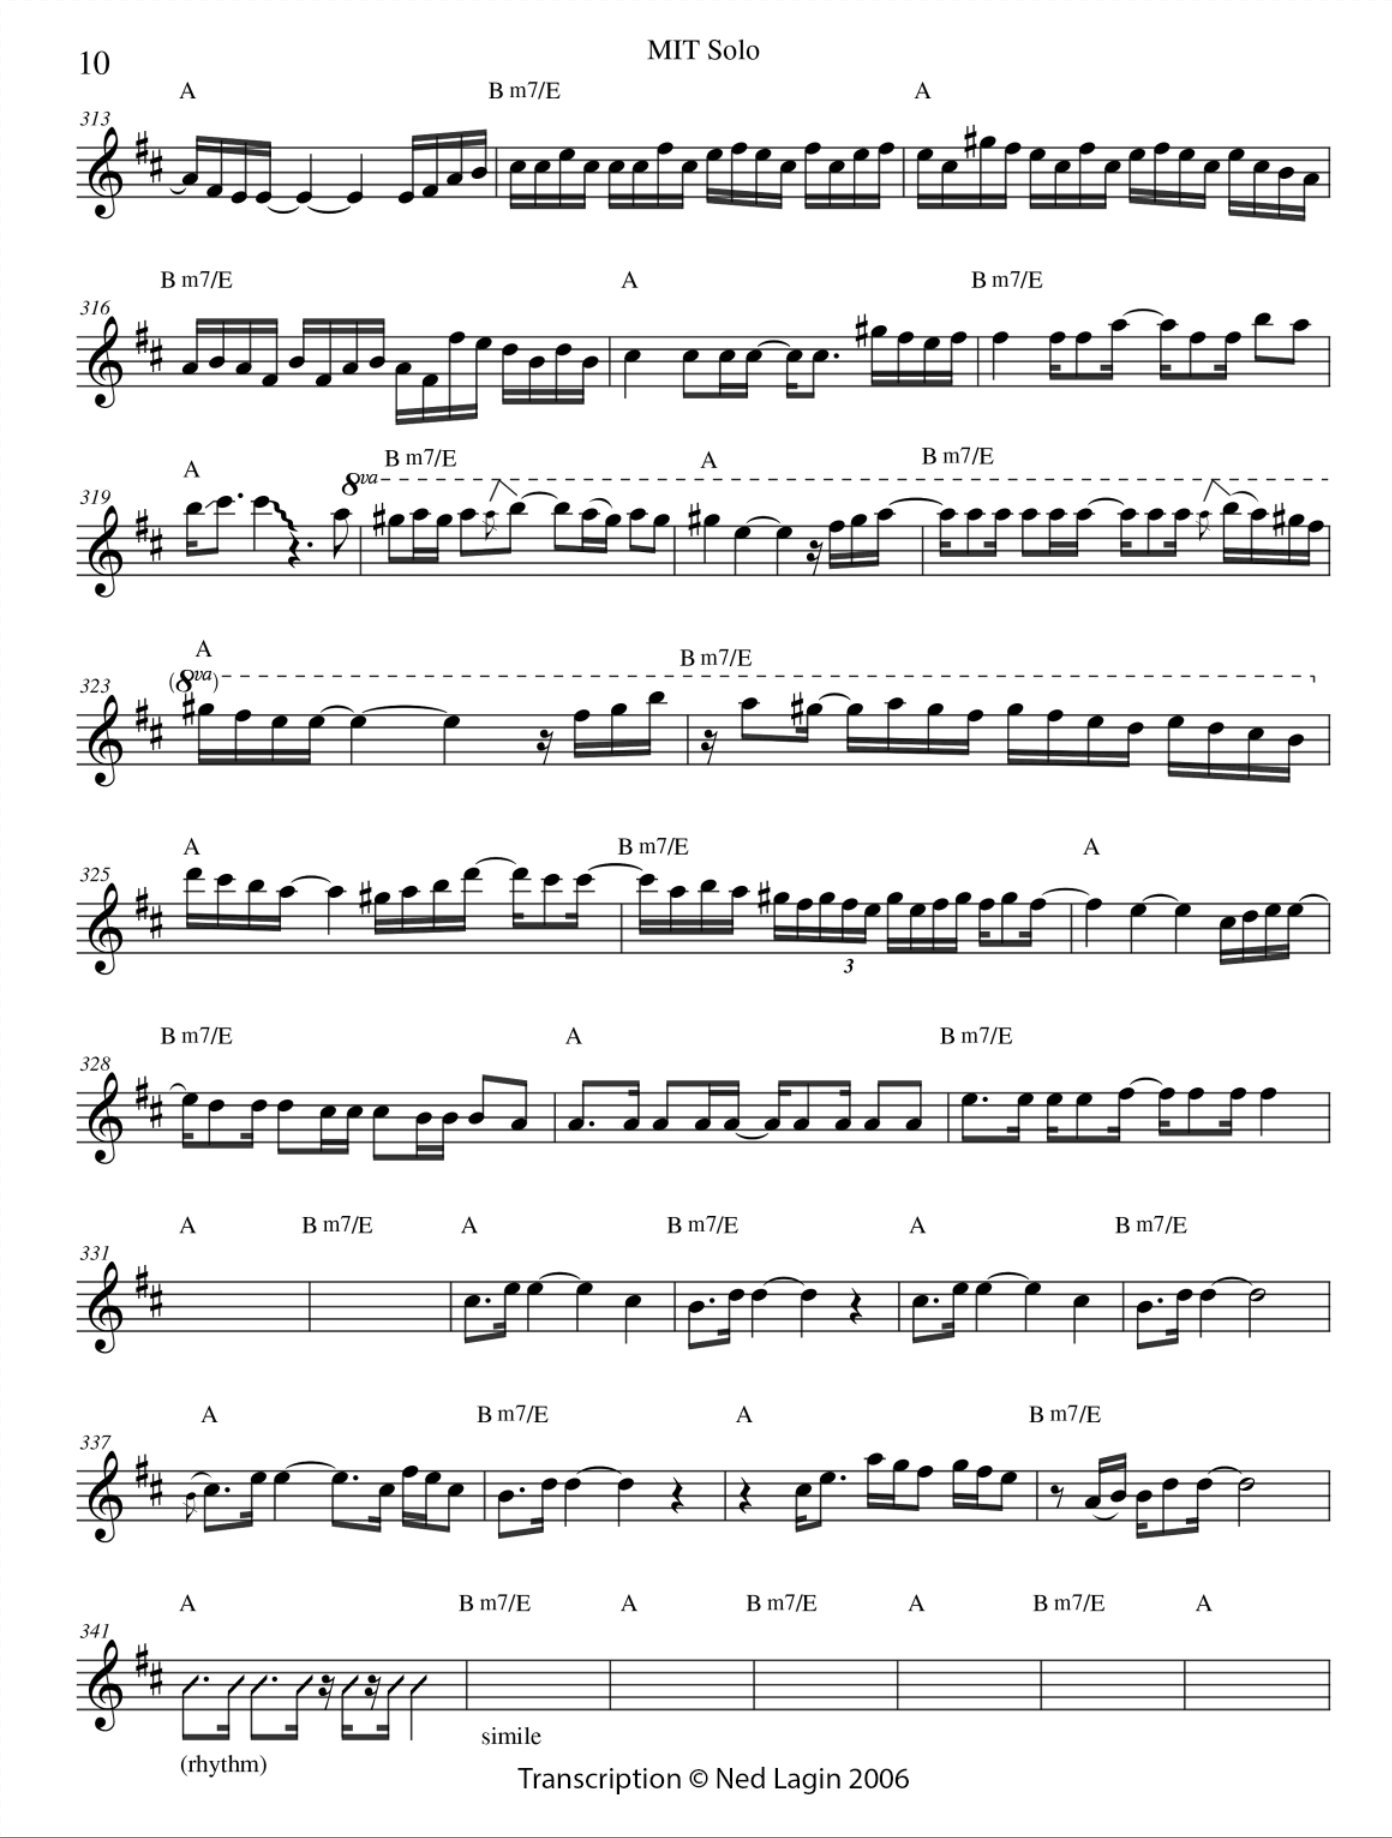 Jerry Garcia guitar solo transcription Page 10 - Photo © Ned Lagin